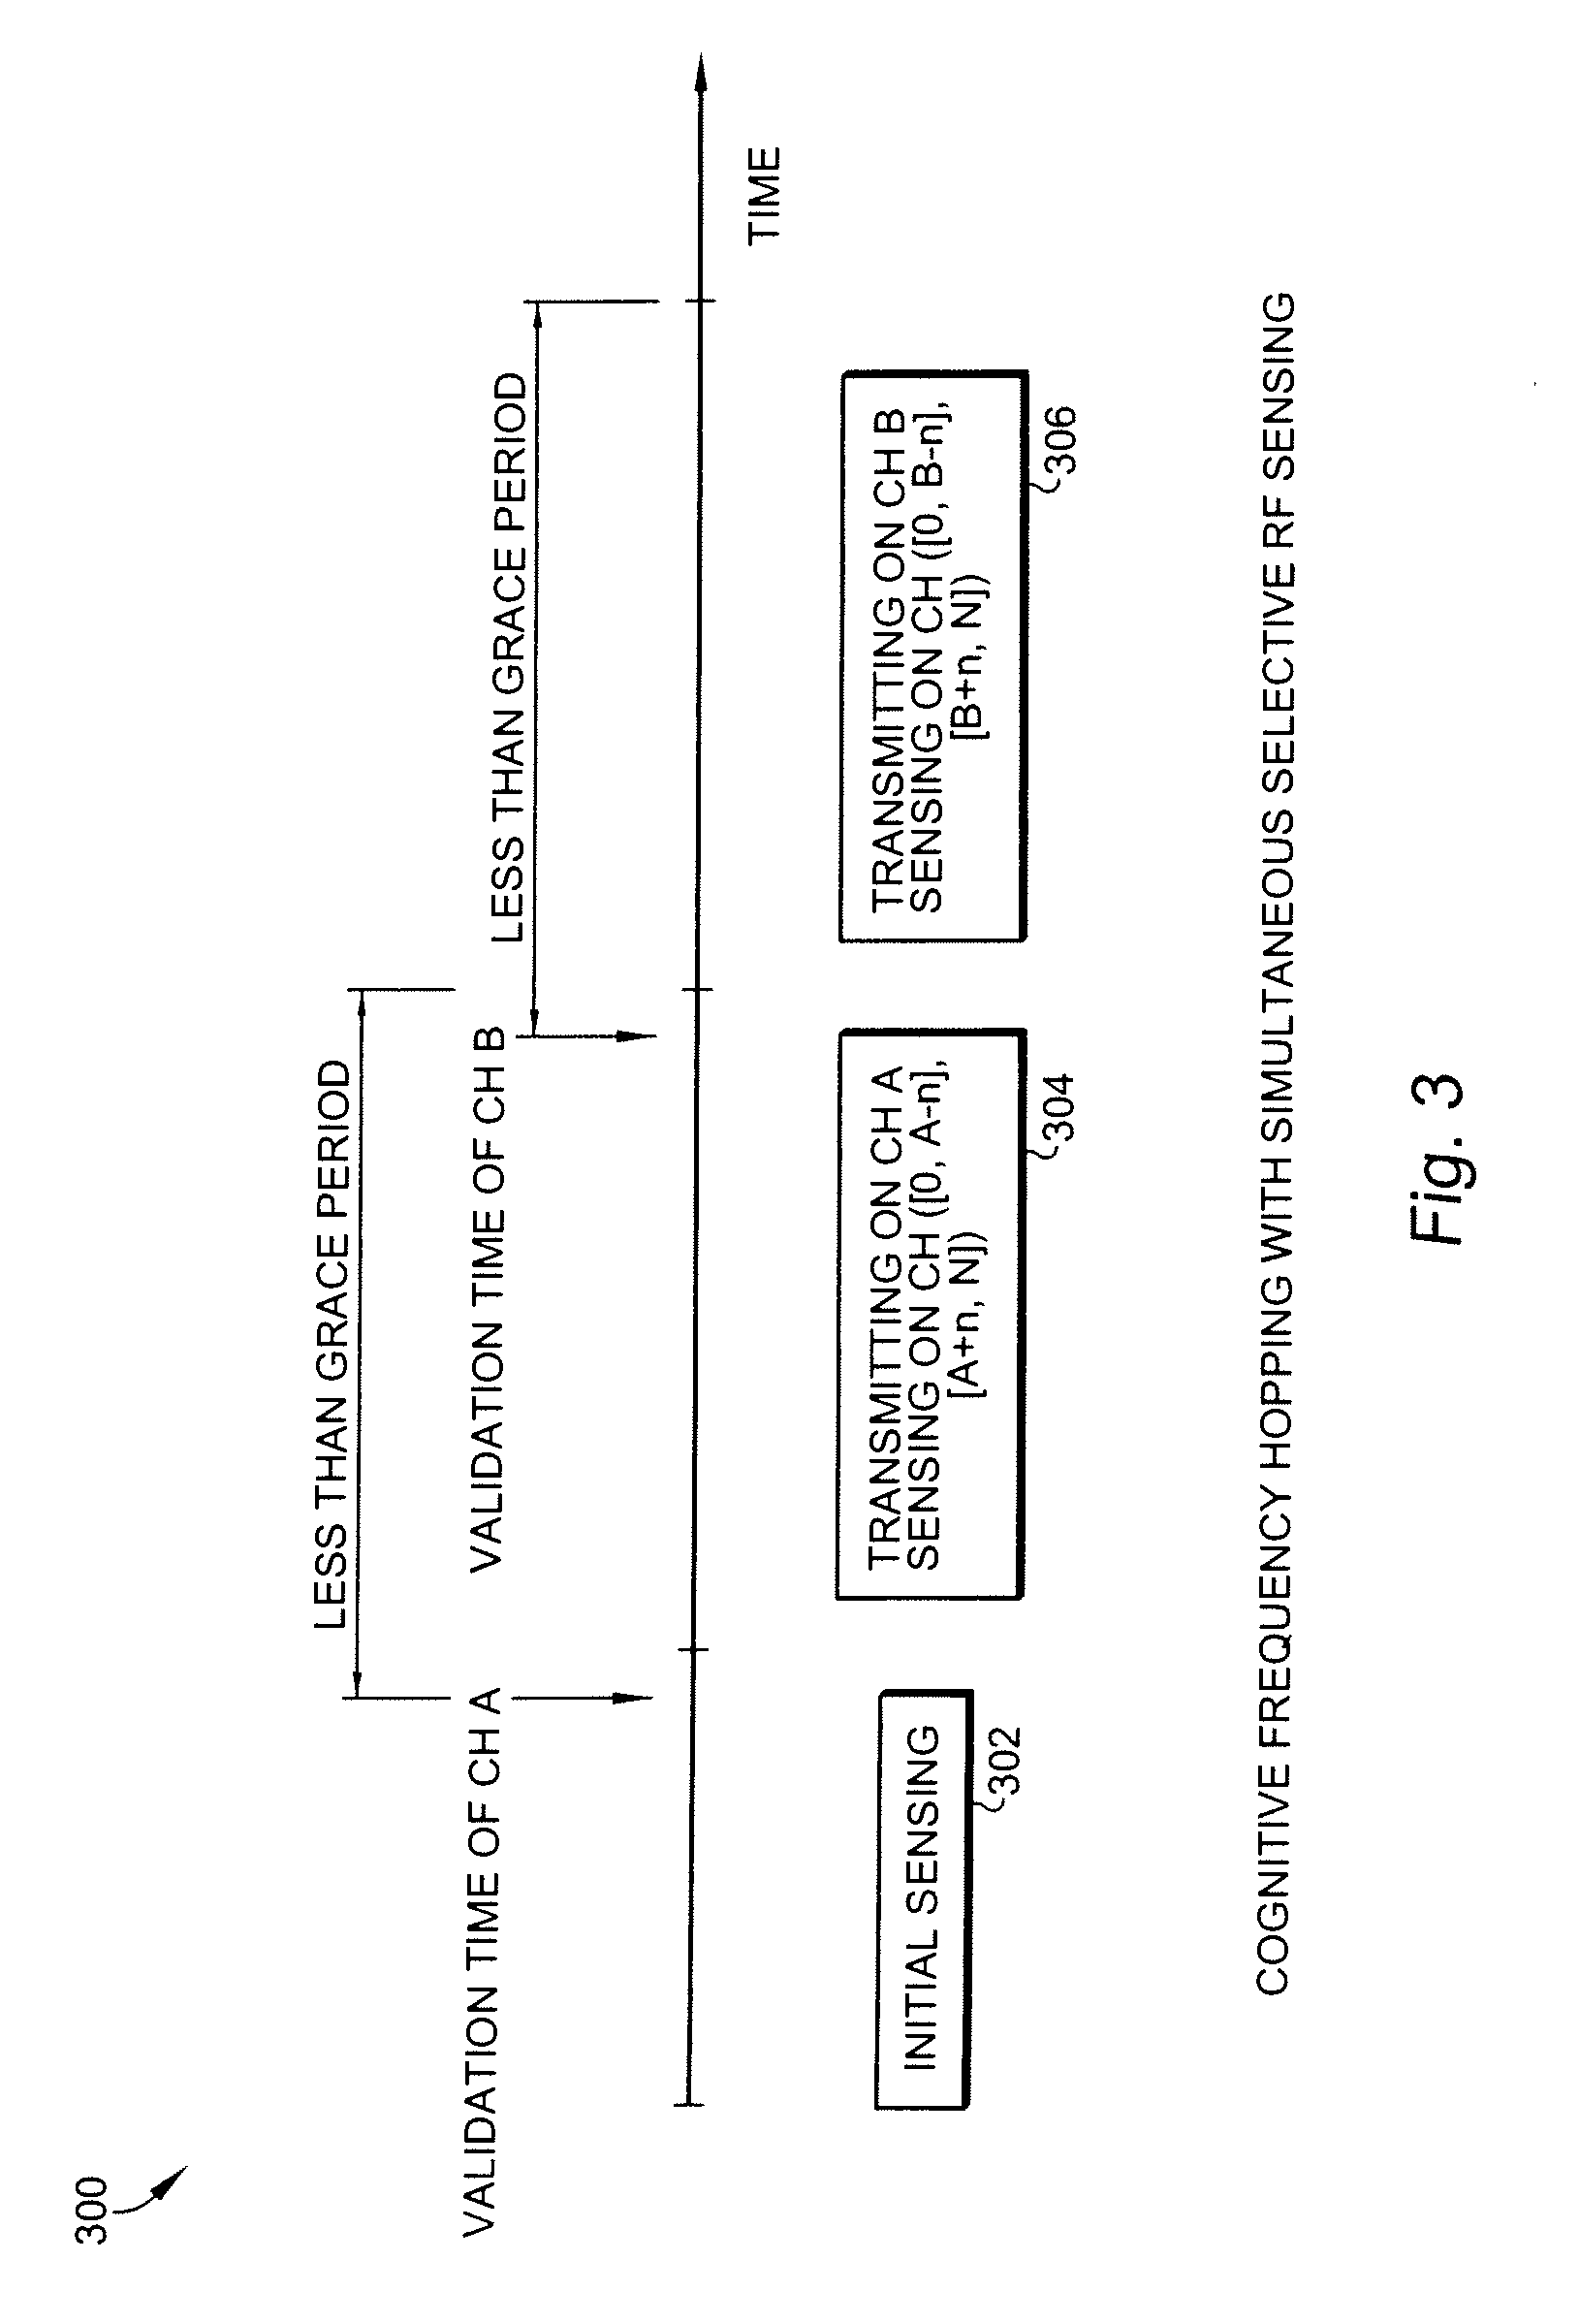 Zero delay frequency switching with dynamic frequency hopping for cognitive radio based dynamic spectrum access network systems